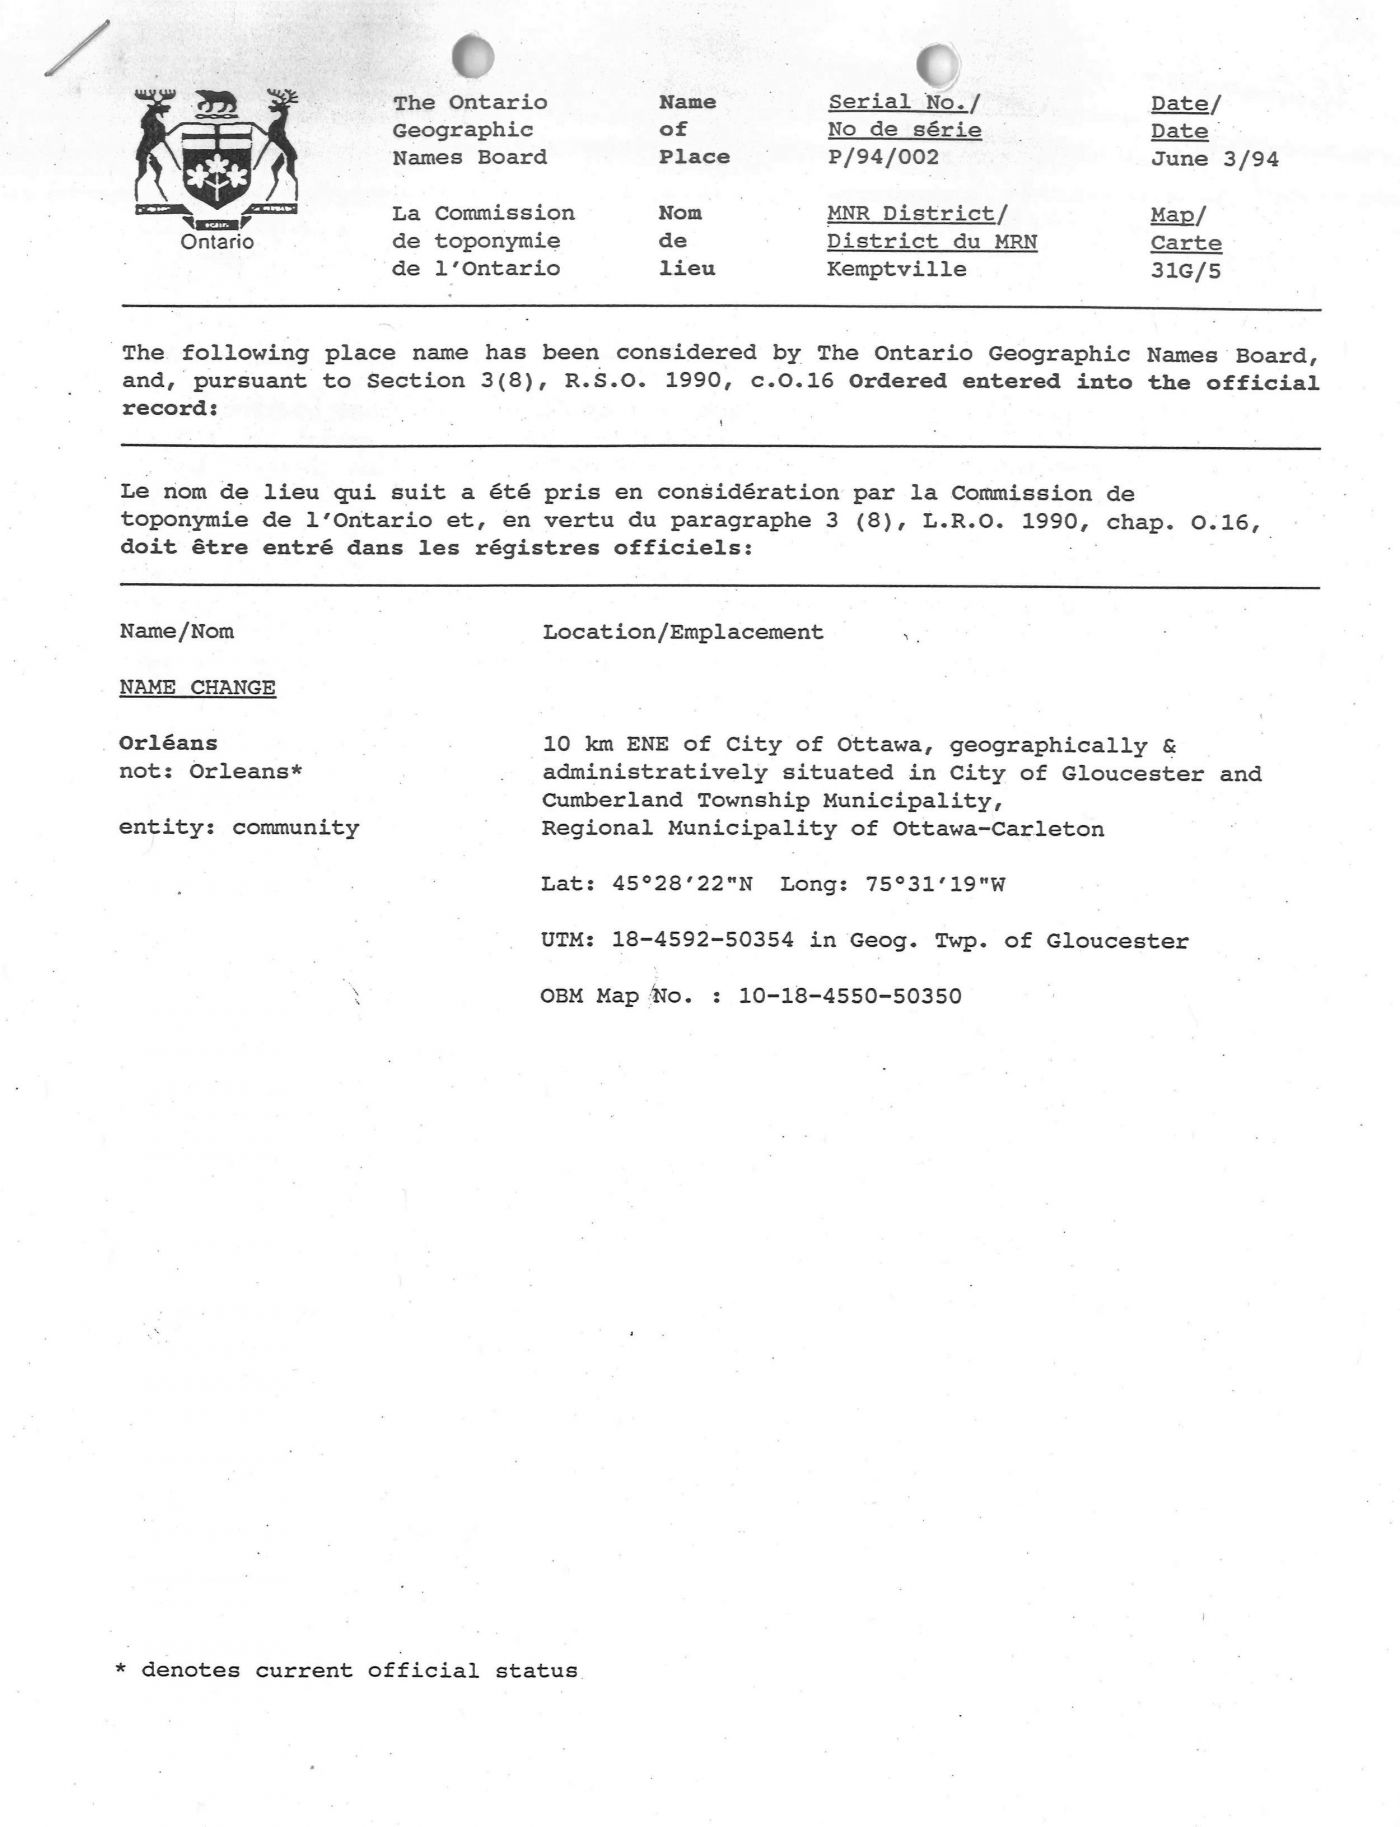 Bilingual typed form, on Ontario Geographic Names Board letterhead.  The document refers to name and location of the place considered by the Board decision. It is said that the order should be entered into the official record.